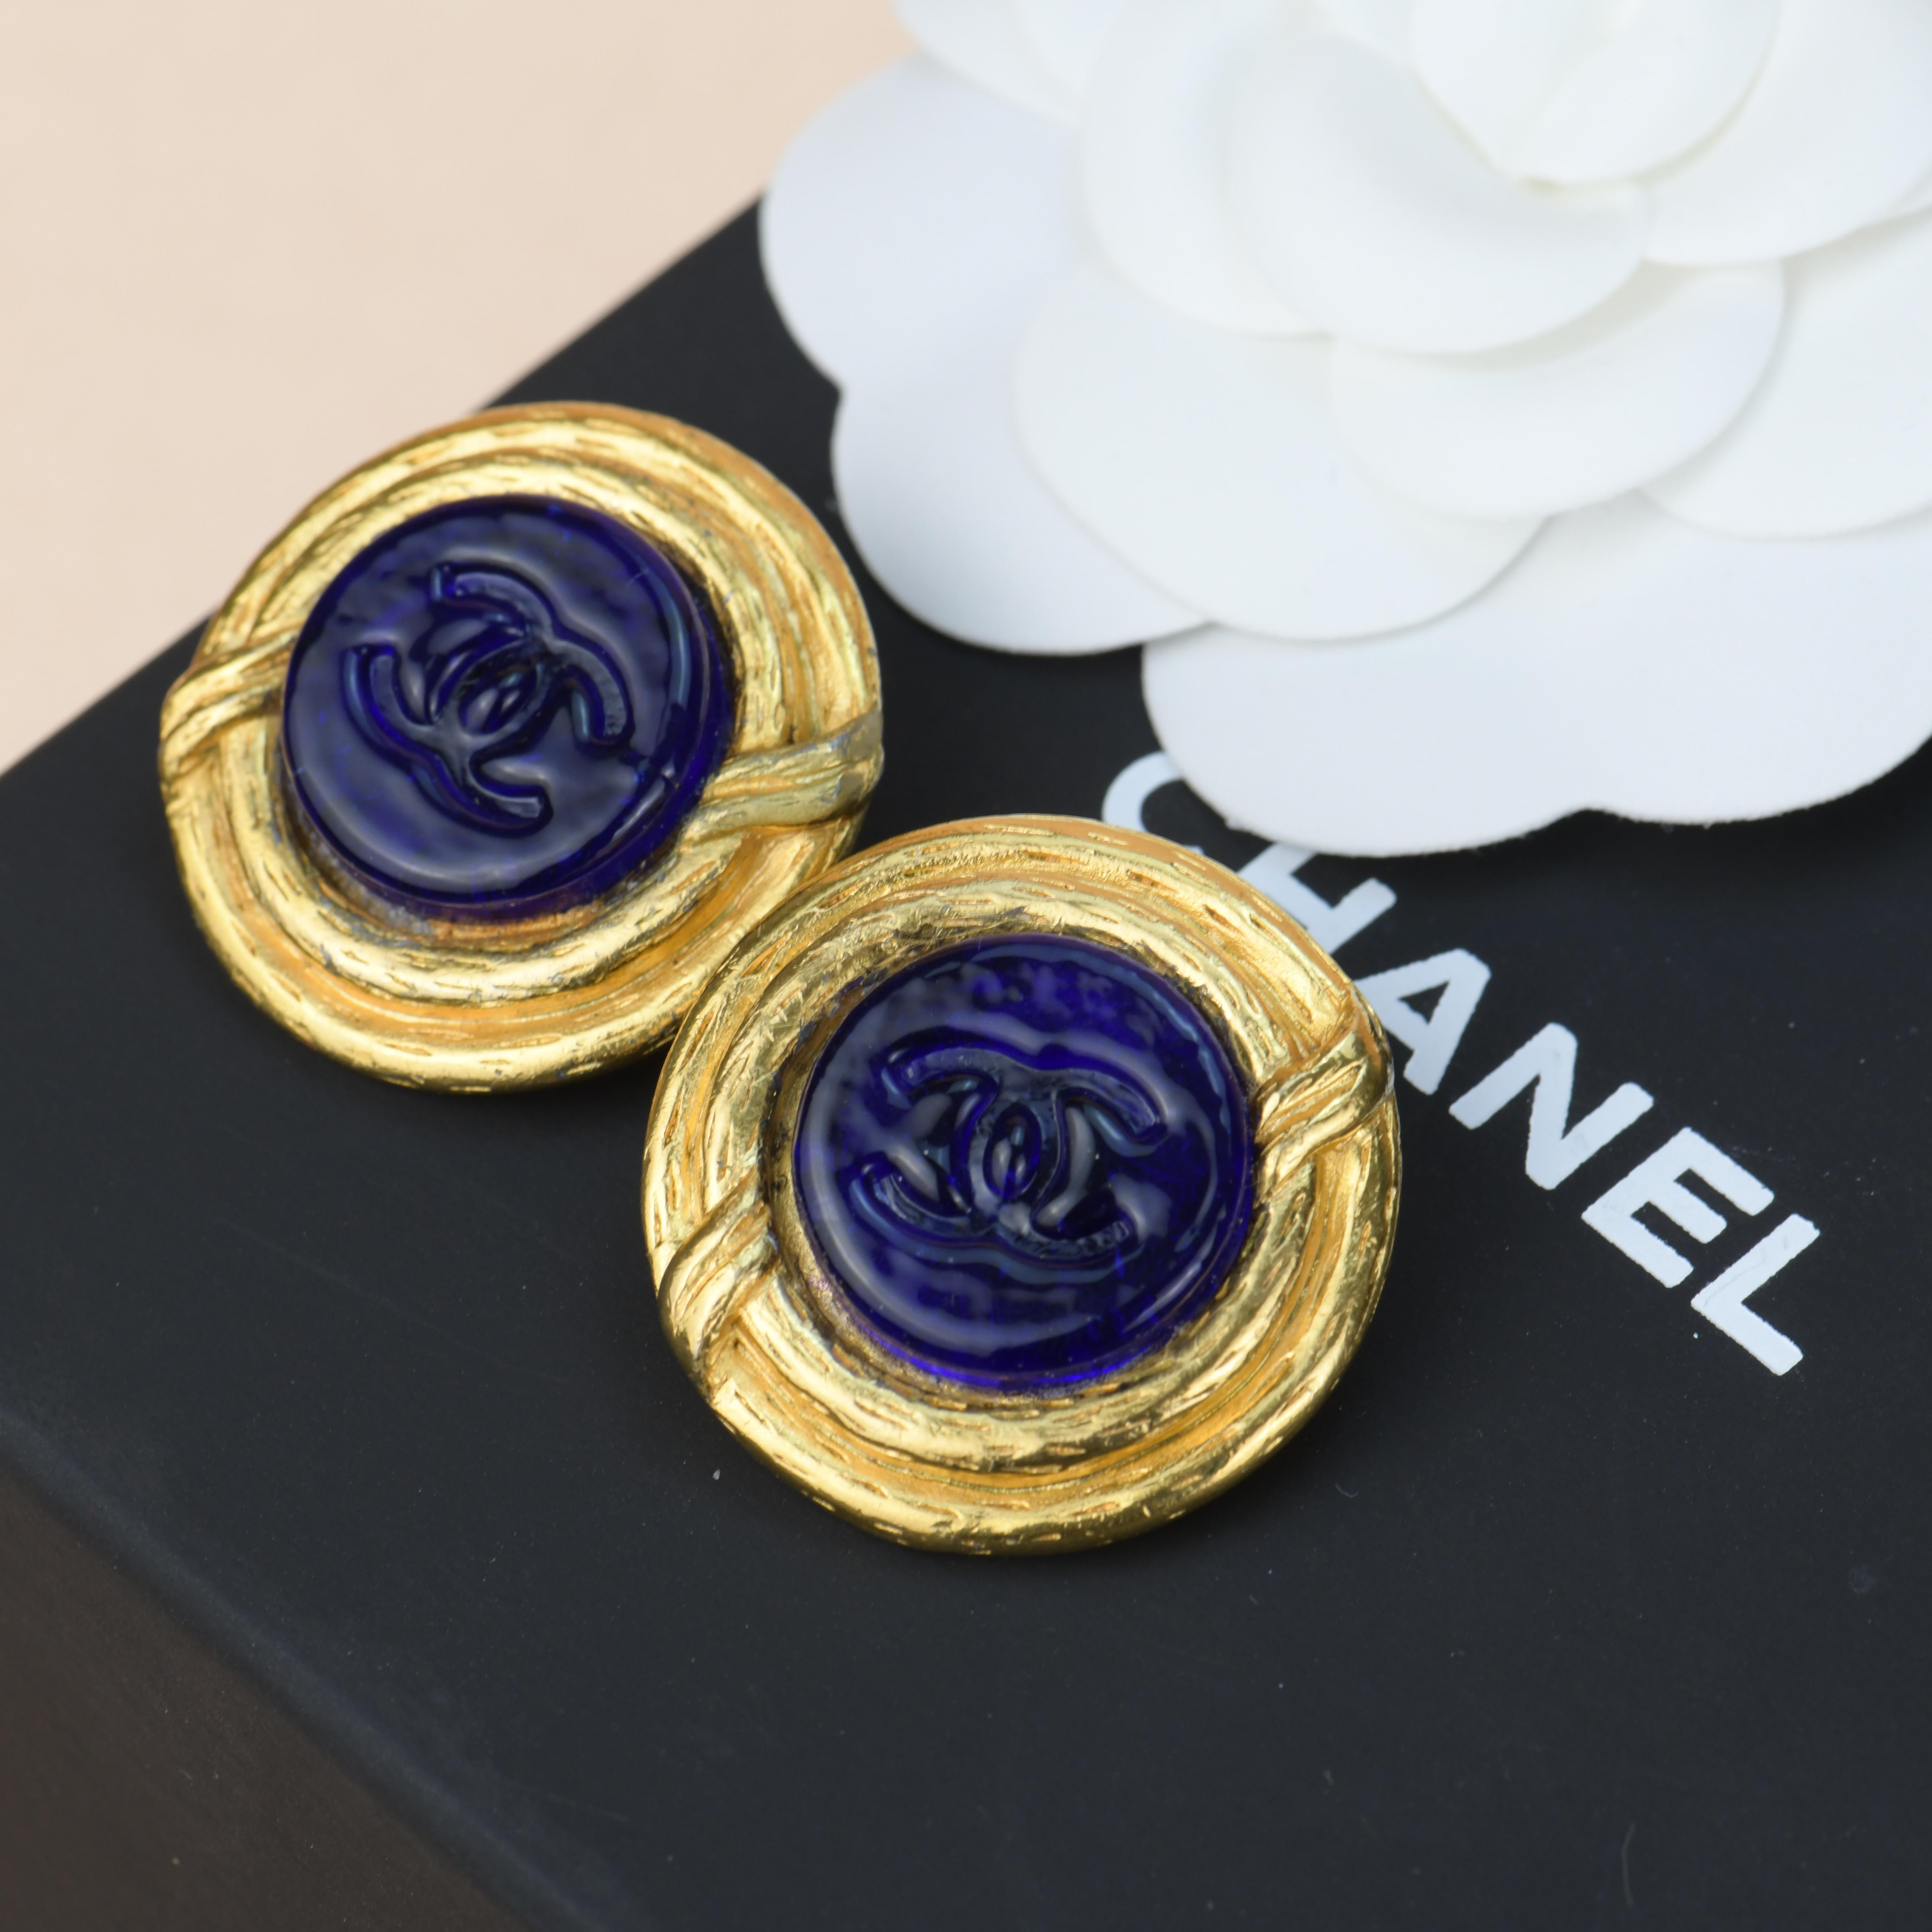 Brand: Chanel 
Period: Approx. 1997
Stamp Date: 97A
Model: Clip-On Earring
__________________________________
Metal: Gold Plated
Stone: Gripoix Glass
Measurement: Approx. 3cm 
Weight: 28g
__________________________________
Condition Excellent 
Comes